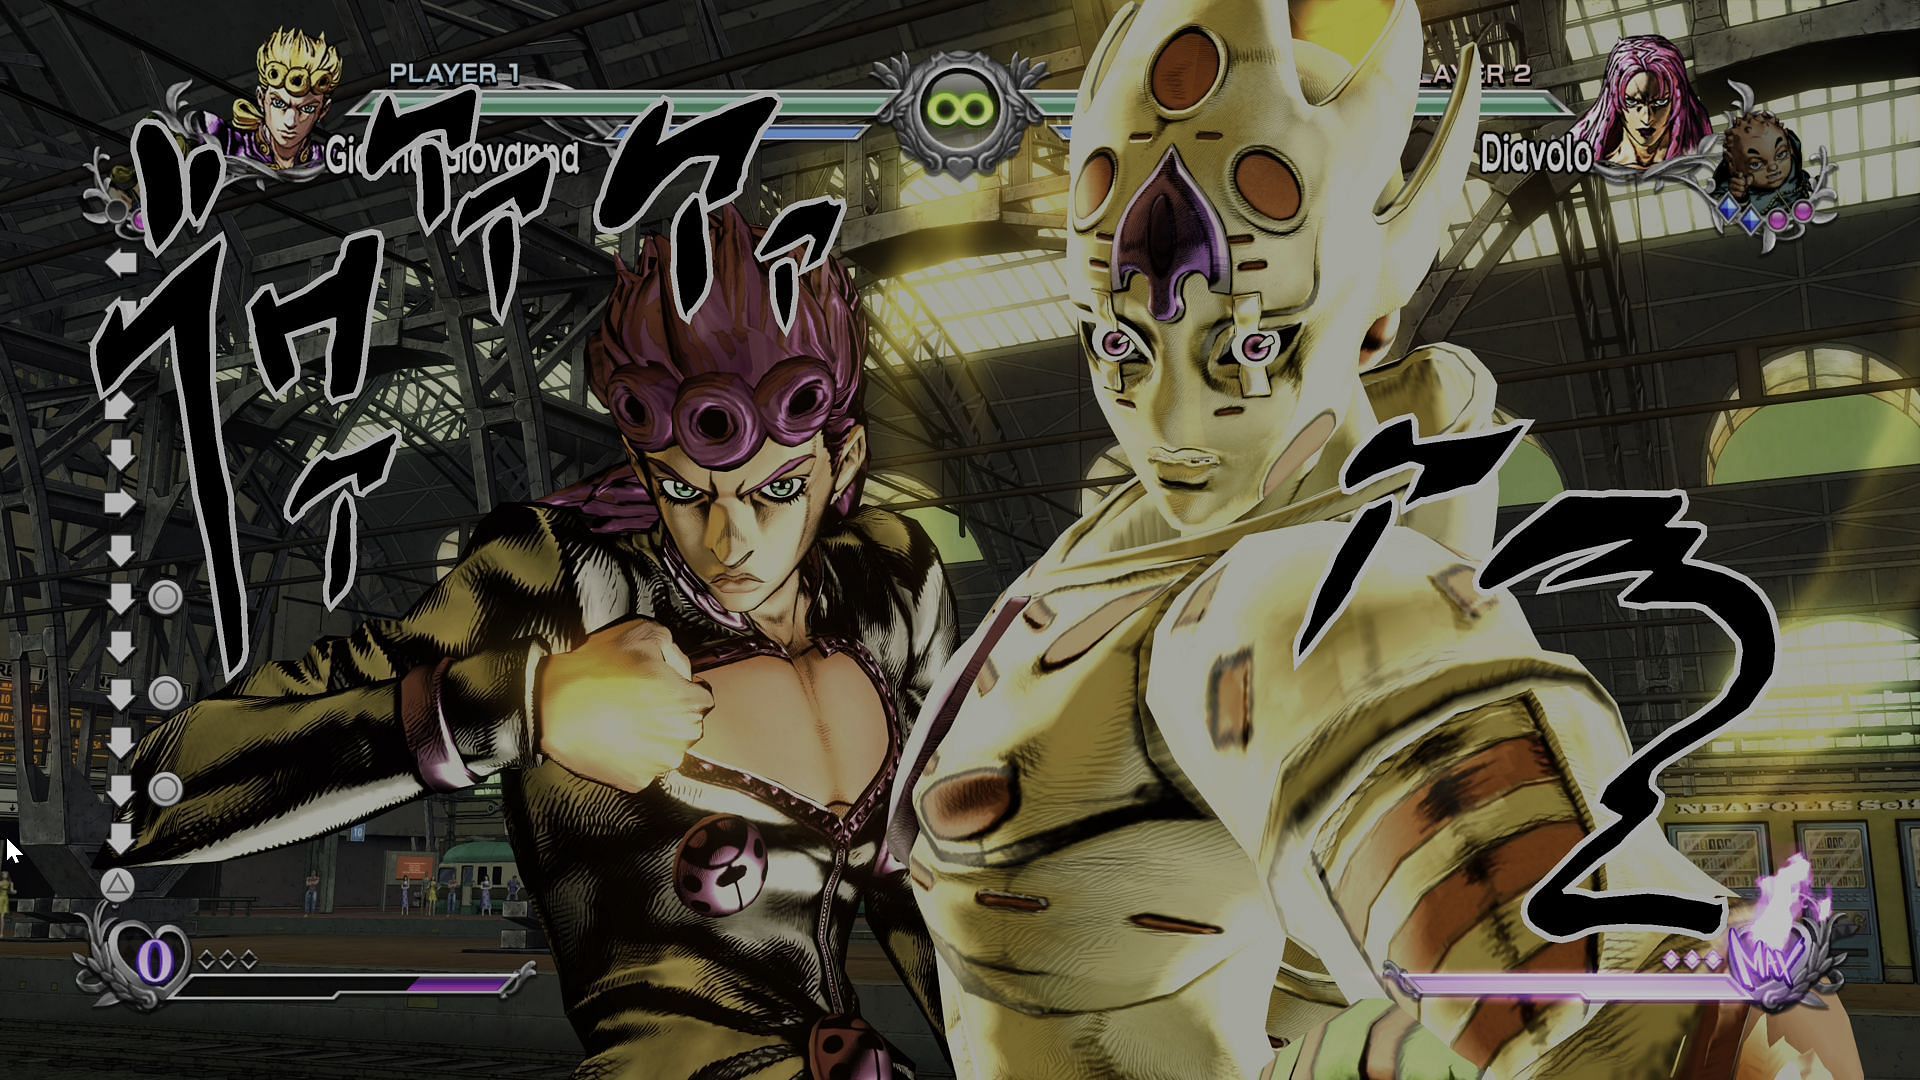 While JoJo's Bizarre Adventure: All-Star Battle R features many po...